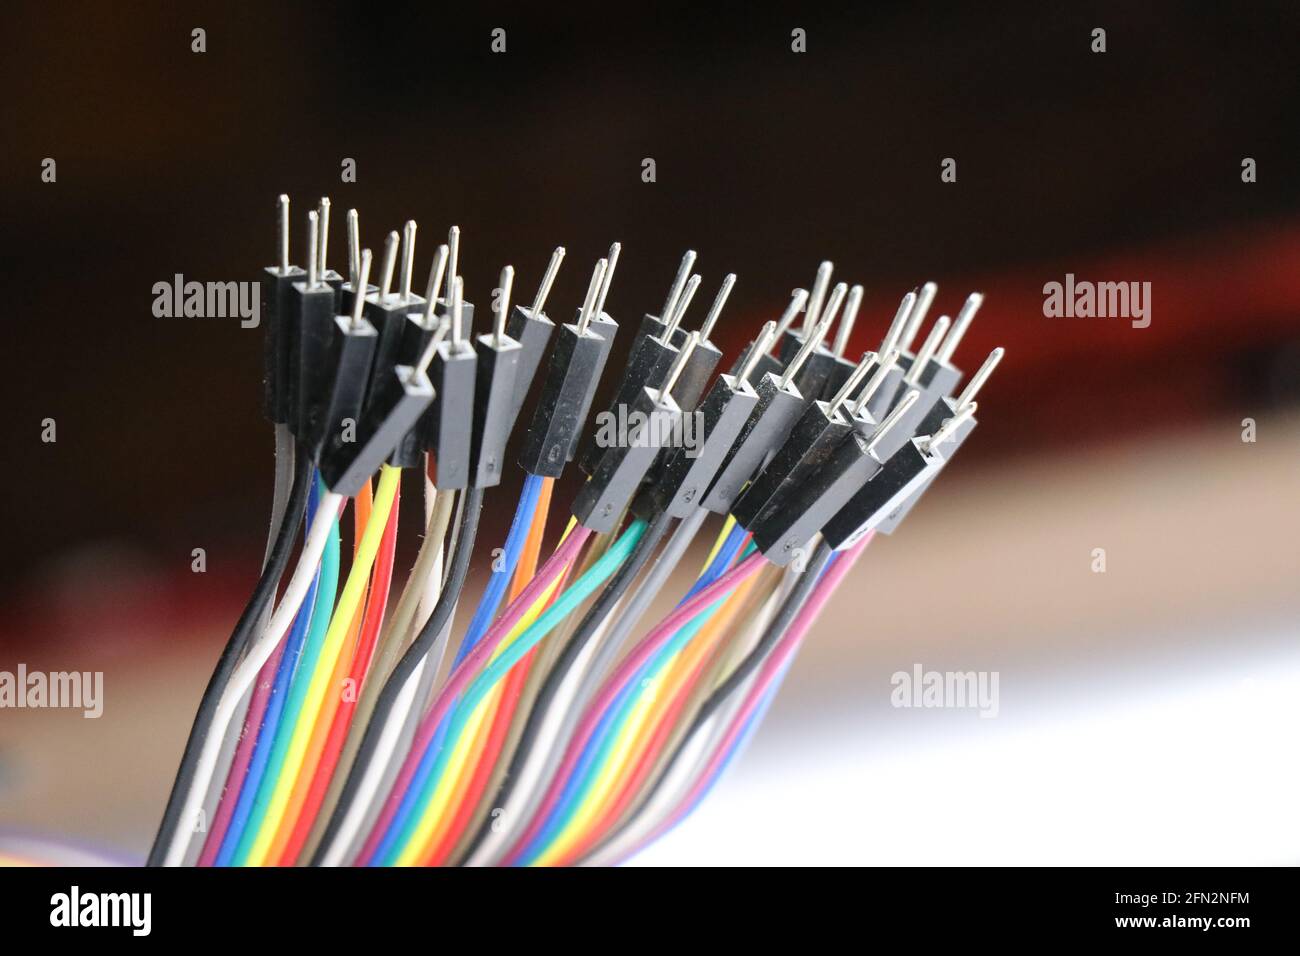 Jumper wires which is male type mainly used in making breadboard connections related to electronics projects, multicolor jumper wire Stock Photo